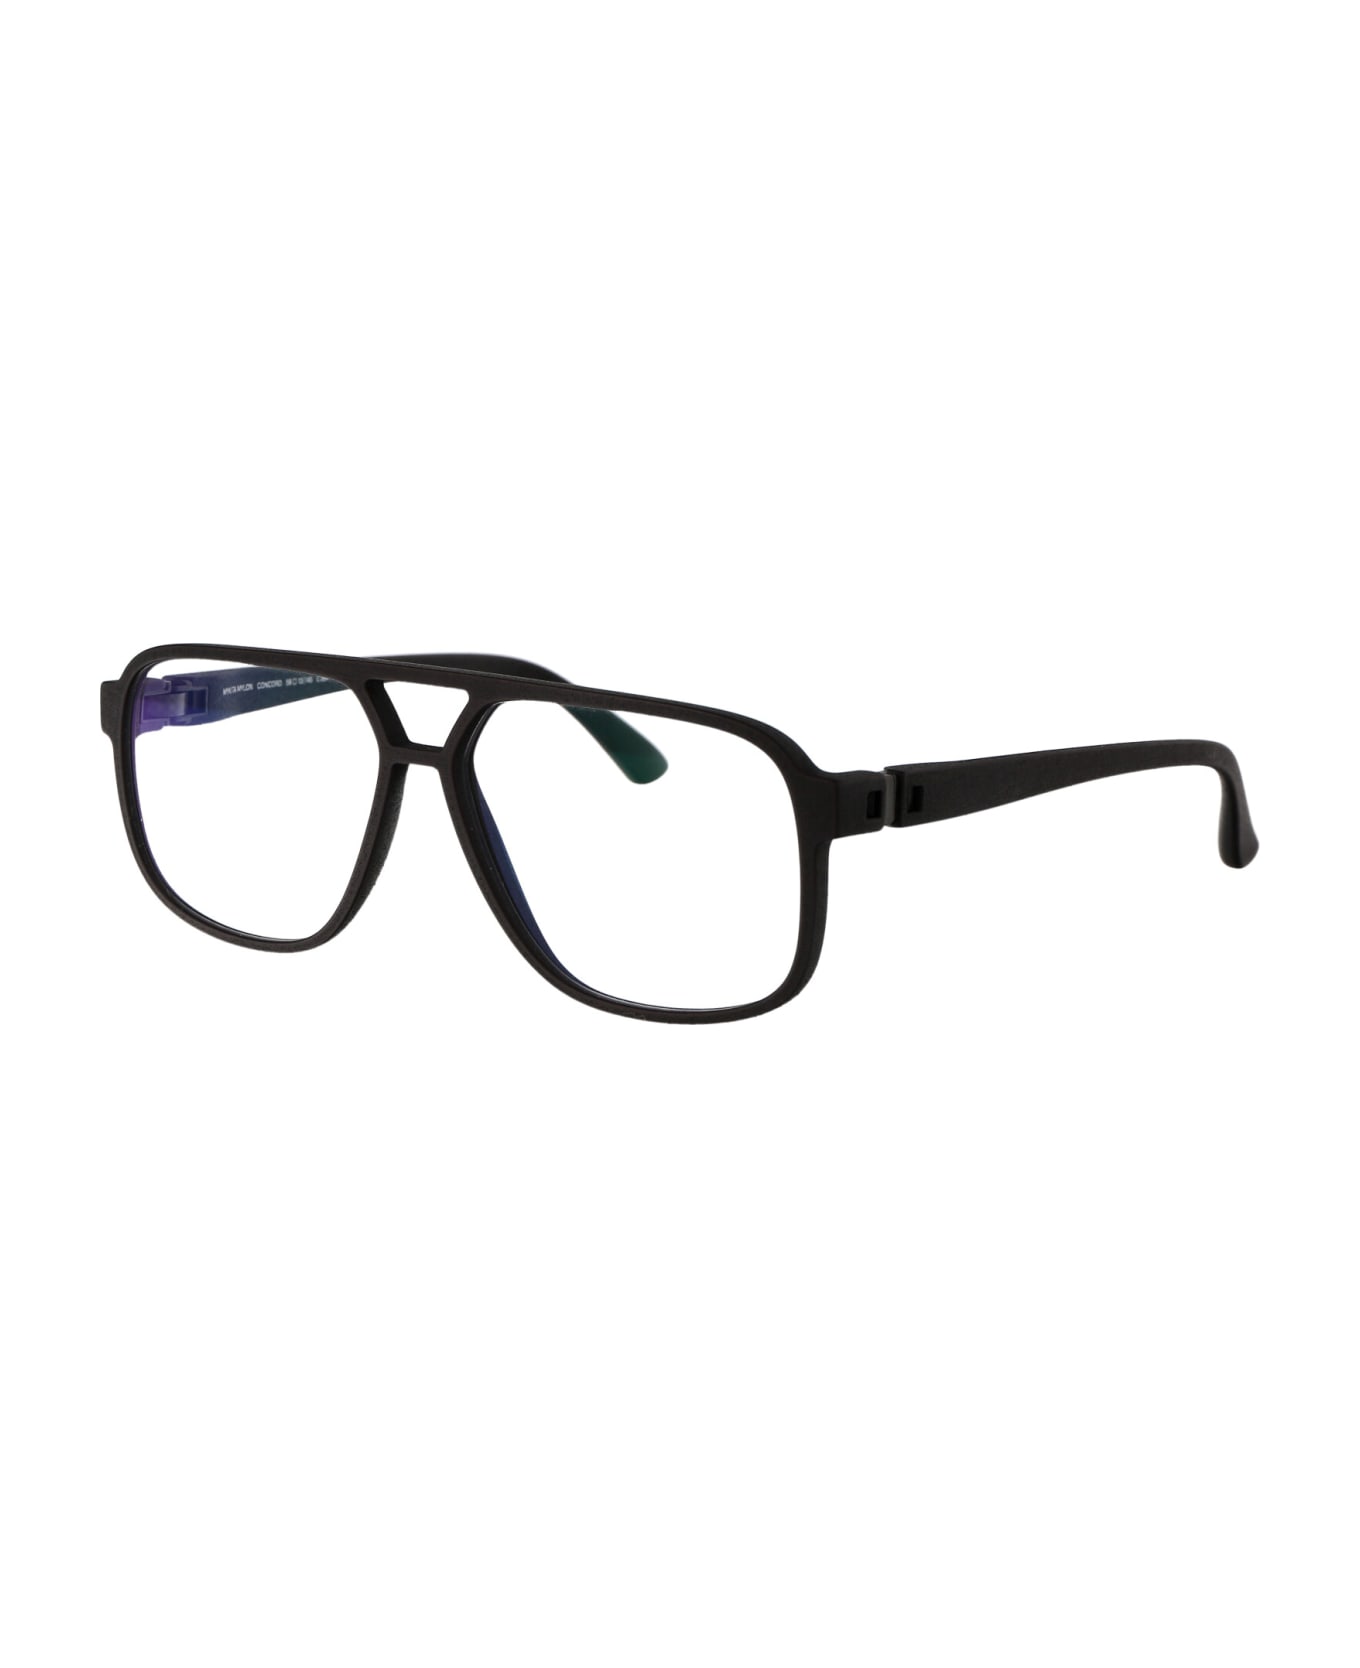 Mykita Concord Glasses - 354 MD1 PITCH BLACK Clear アイウェア